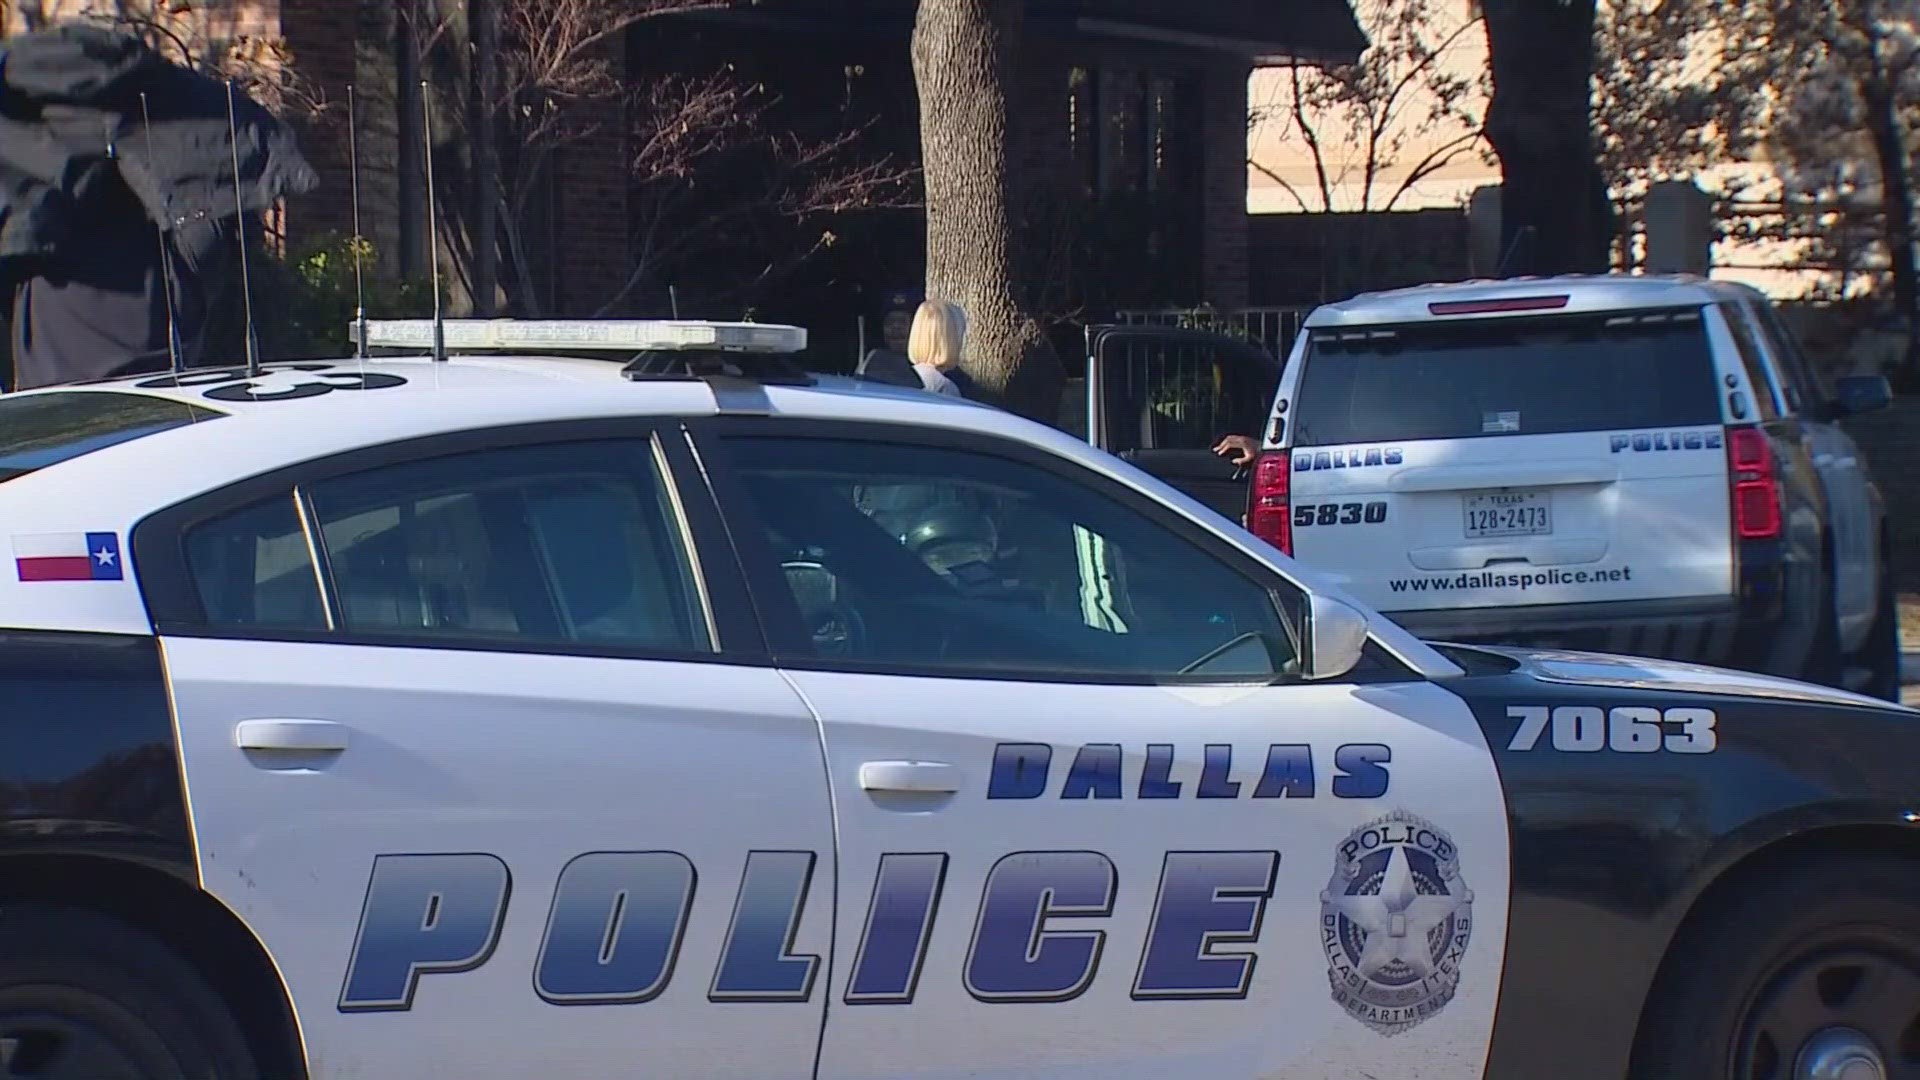 A search is underway for a suspect who shot a man Wednesday afternoon in the Dallas suburb of Lake Highlands.